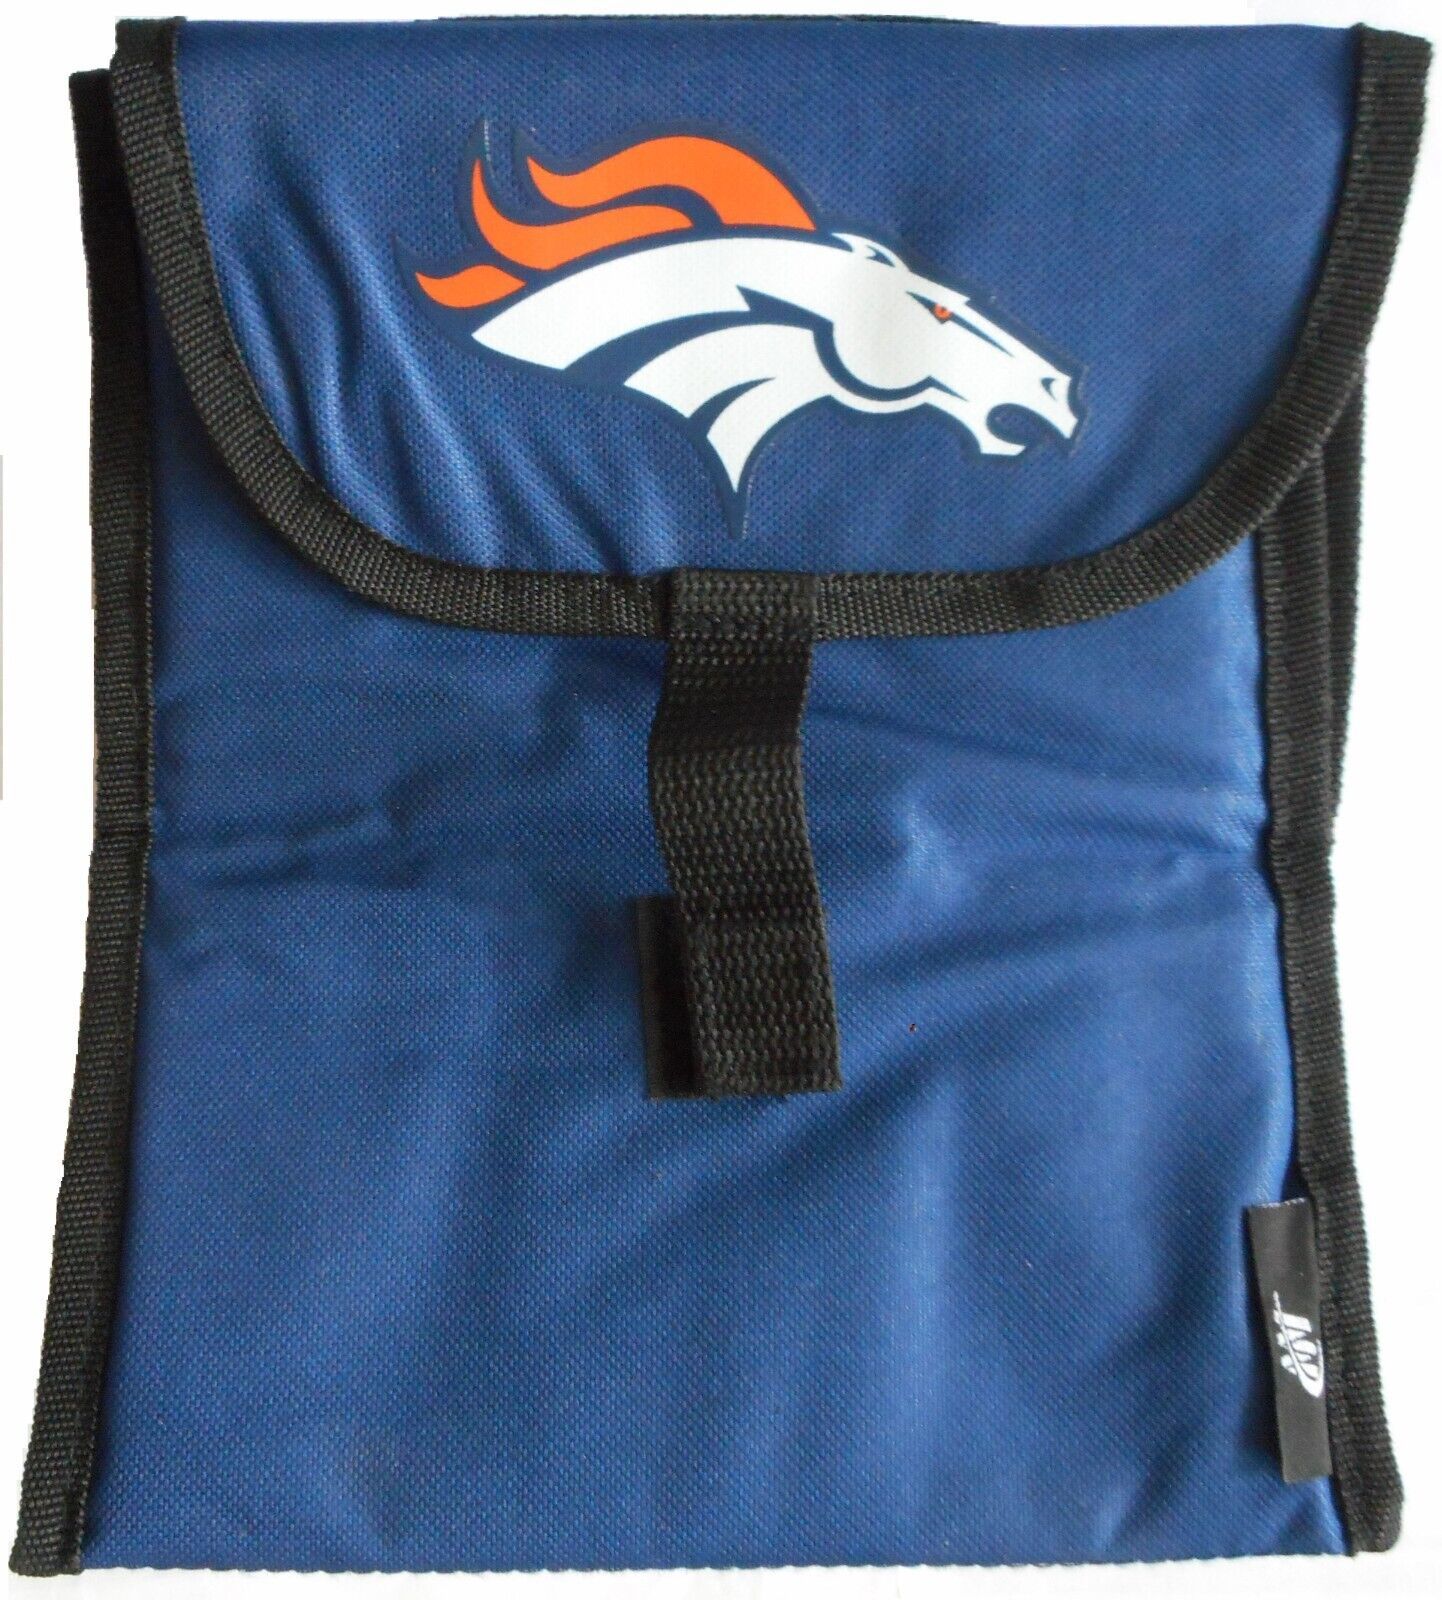 Primary image for Denver Broncos insulated foldable lunch bag measures 10 x 9 x 4  inches